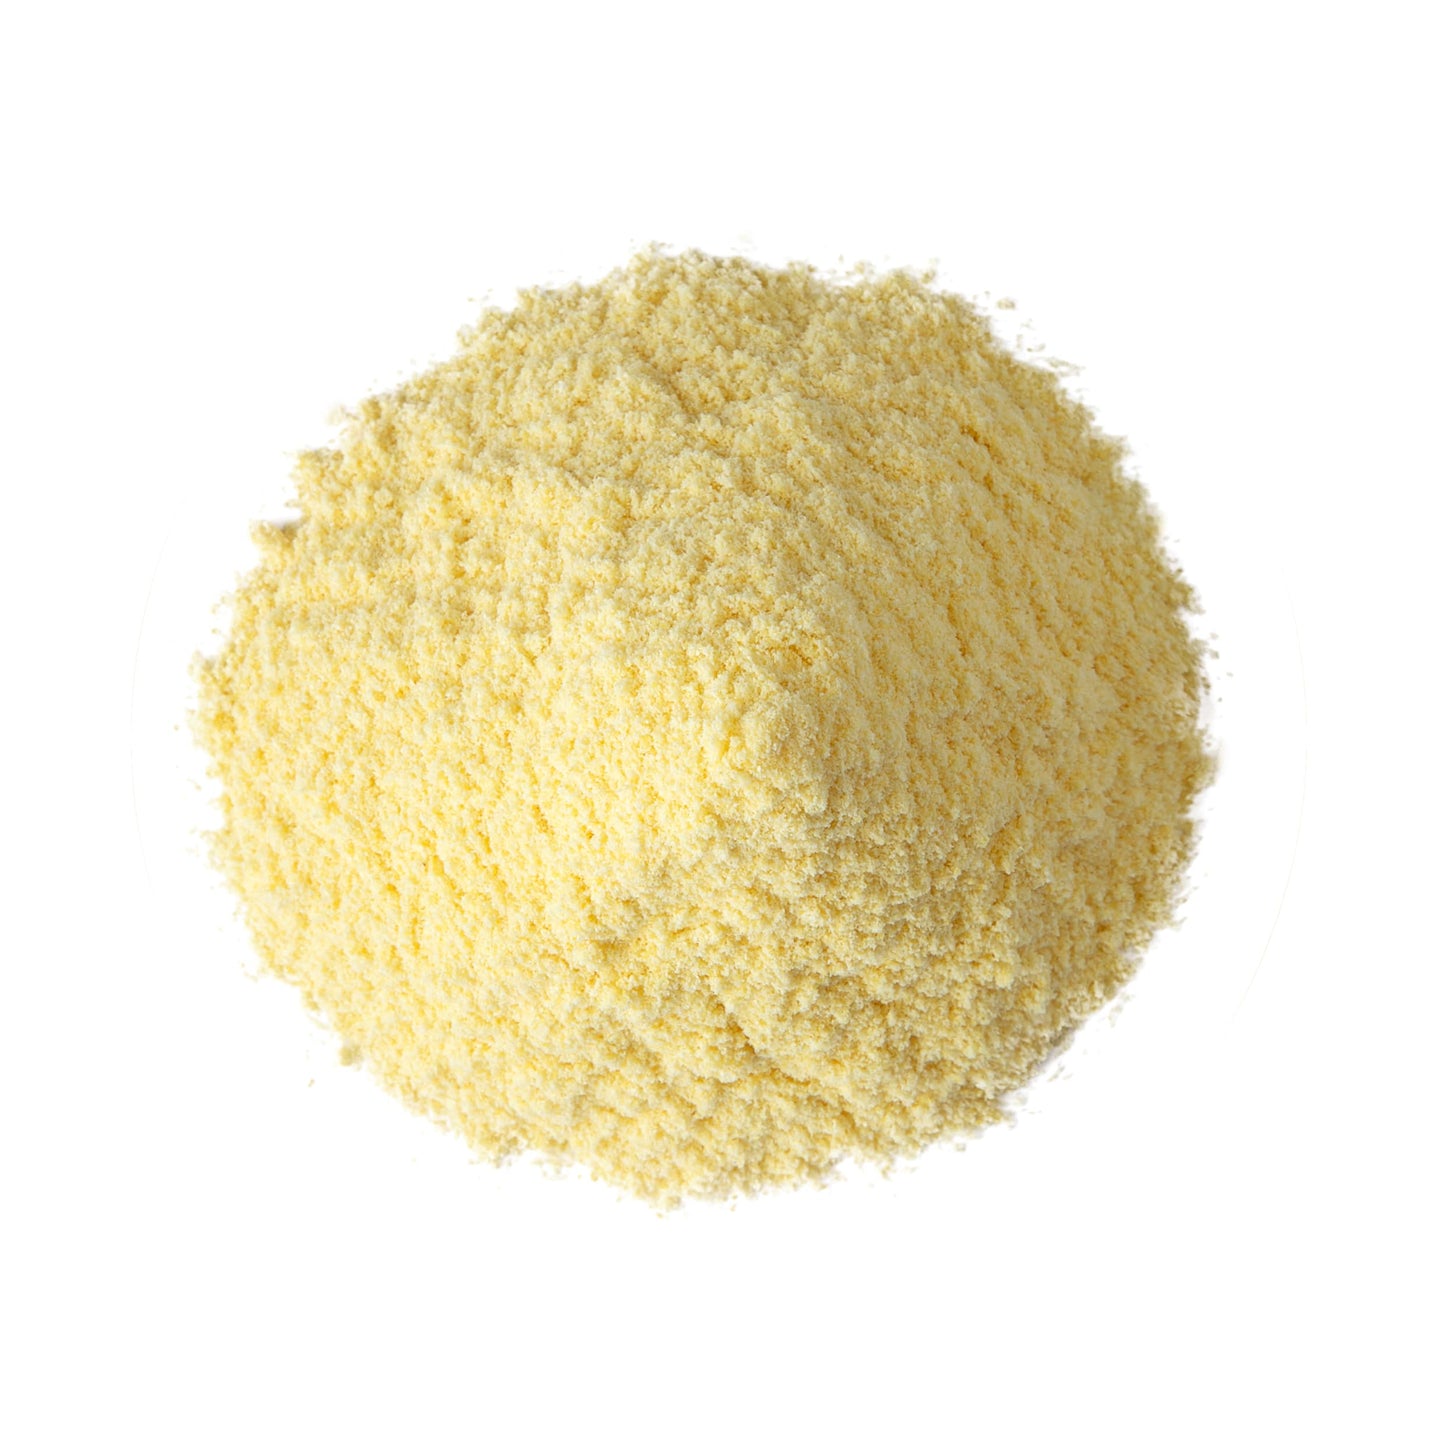 Corn Flour - Made from Whole Grain, Finely Ground Meal, Vegan, Kosher, Bulk, Great for Cooking and Baking Cornbread, Muffins, Pancakes, Waffles and Tortillas. Low Sodium, Product of the USA